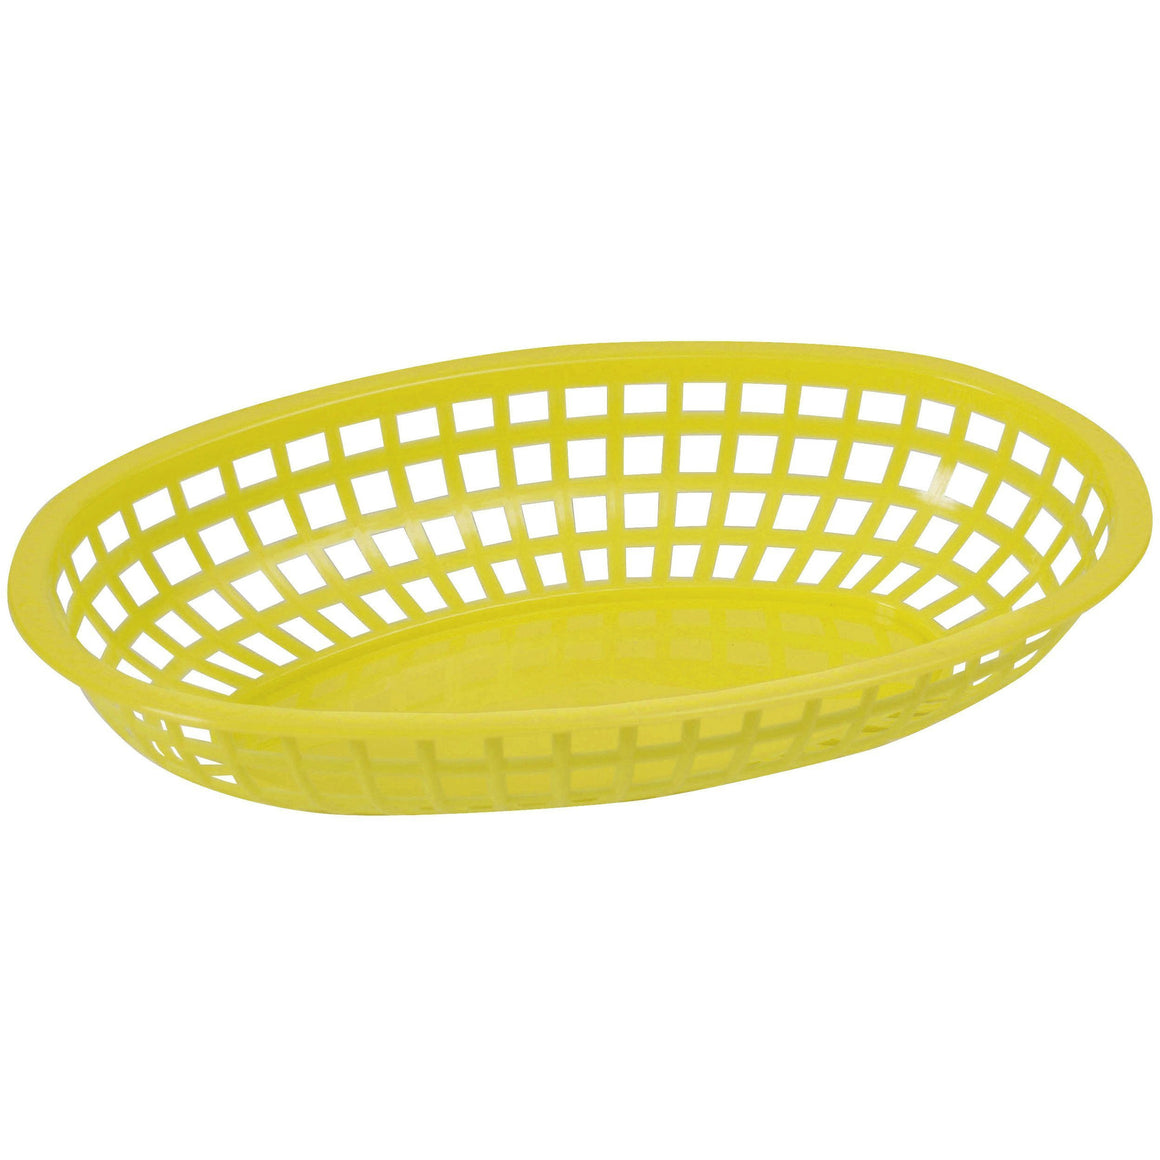 Winco - POB-Y - Fast Food Baskets, Oval, 10-1/4" x 6-3/4" x 2", Yellow - Tabletop - Maltese & Co New and Used  restaurant Equipment 